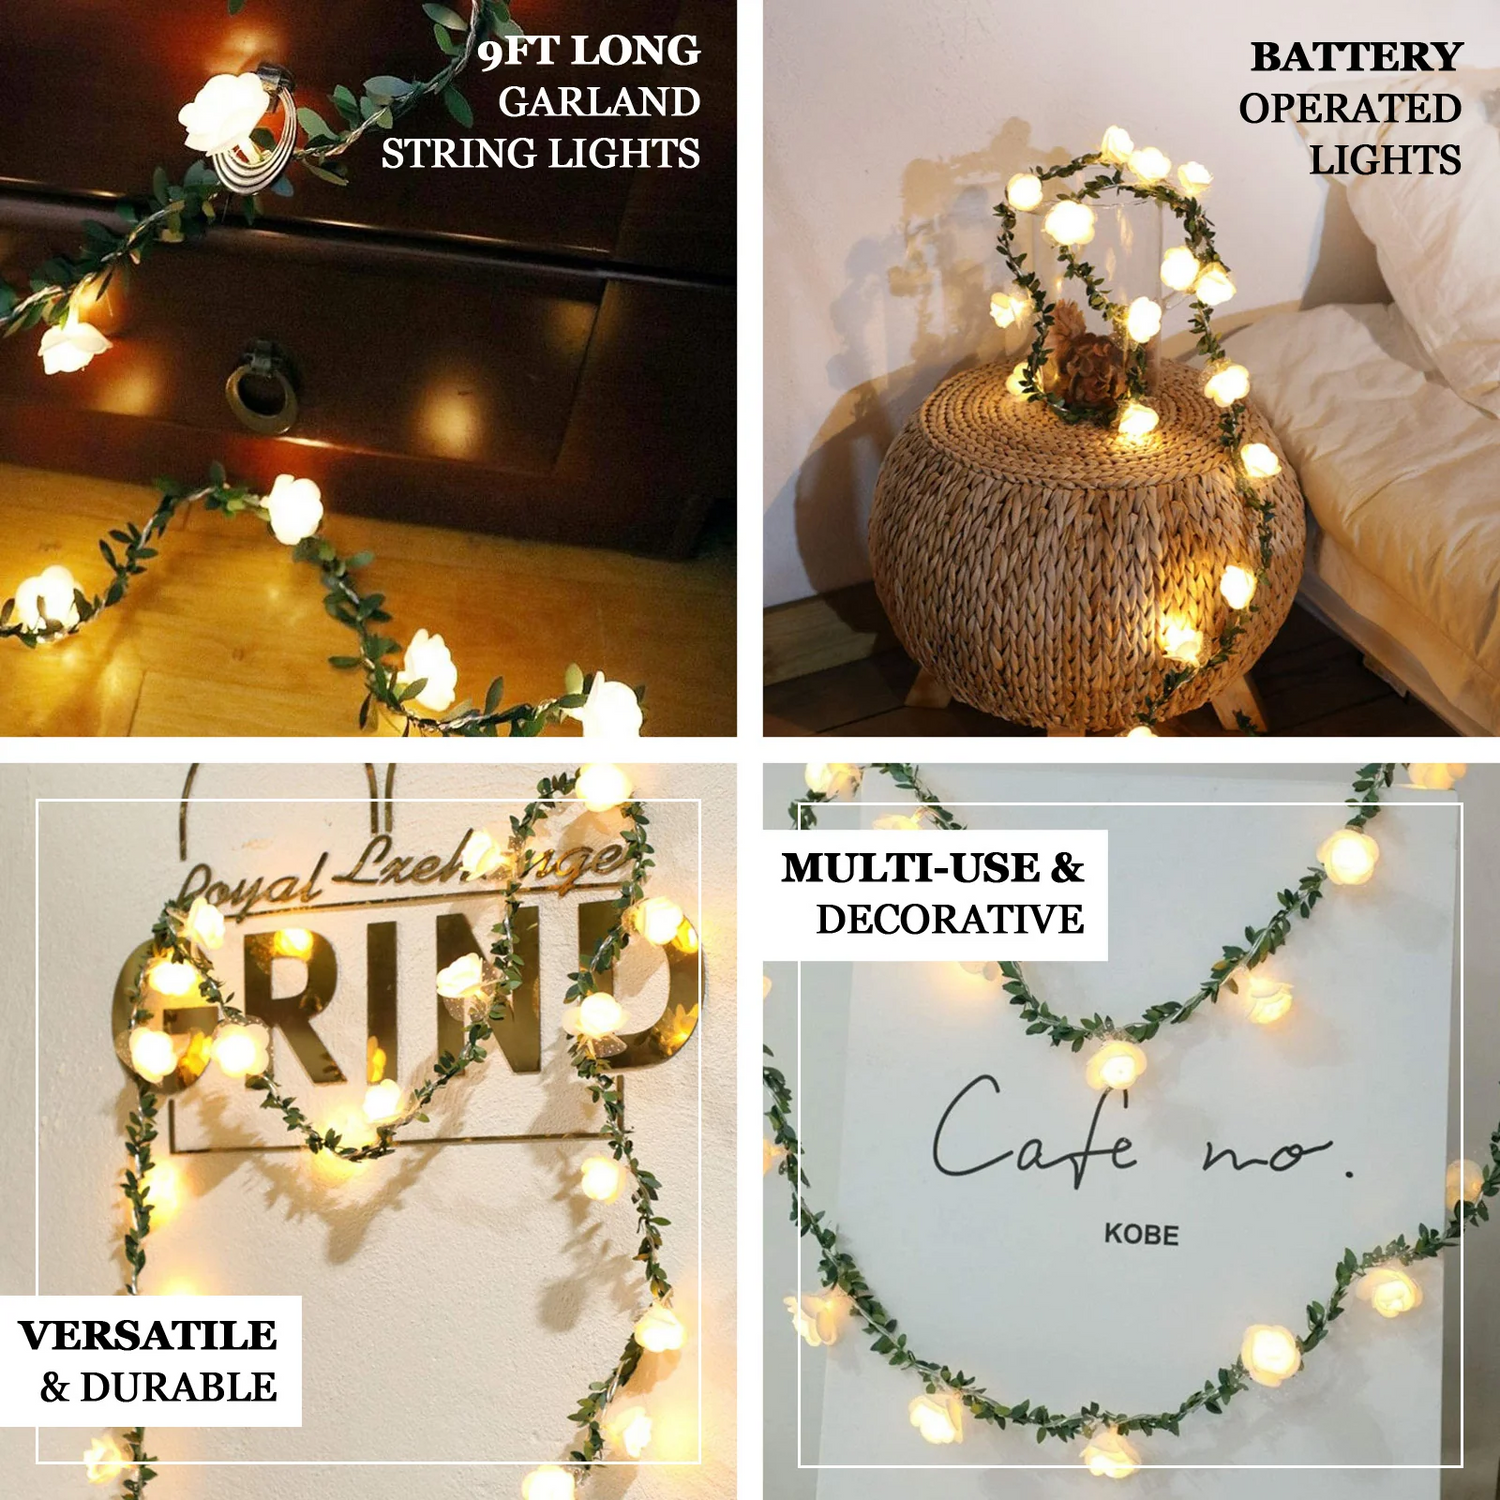 This Warm White 20 LED Faux Rose Lace Garland Vine String Lights is the perfect decoration for any occasion, be it formal or casual. It is made of high-quality artificial flowers and lace petals, and is decorated with LED light beads, enough for your guests to take photos and take pictures. It&